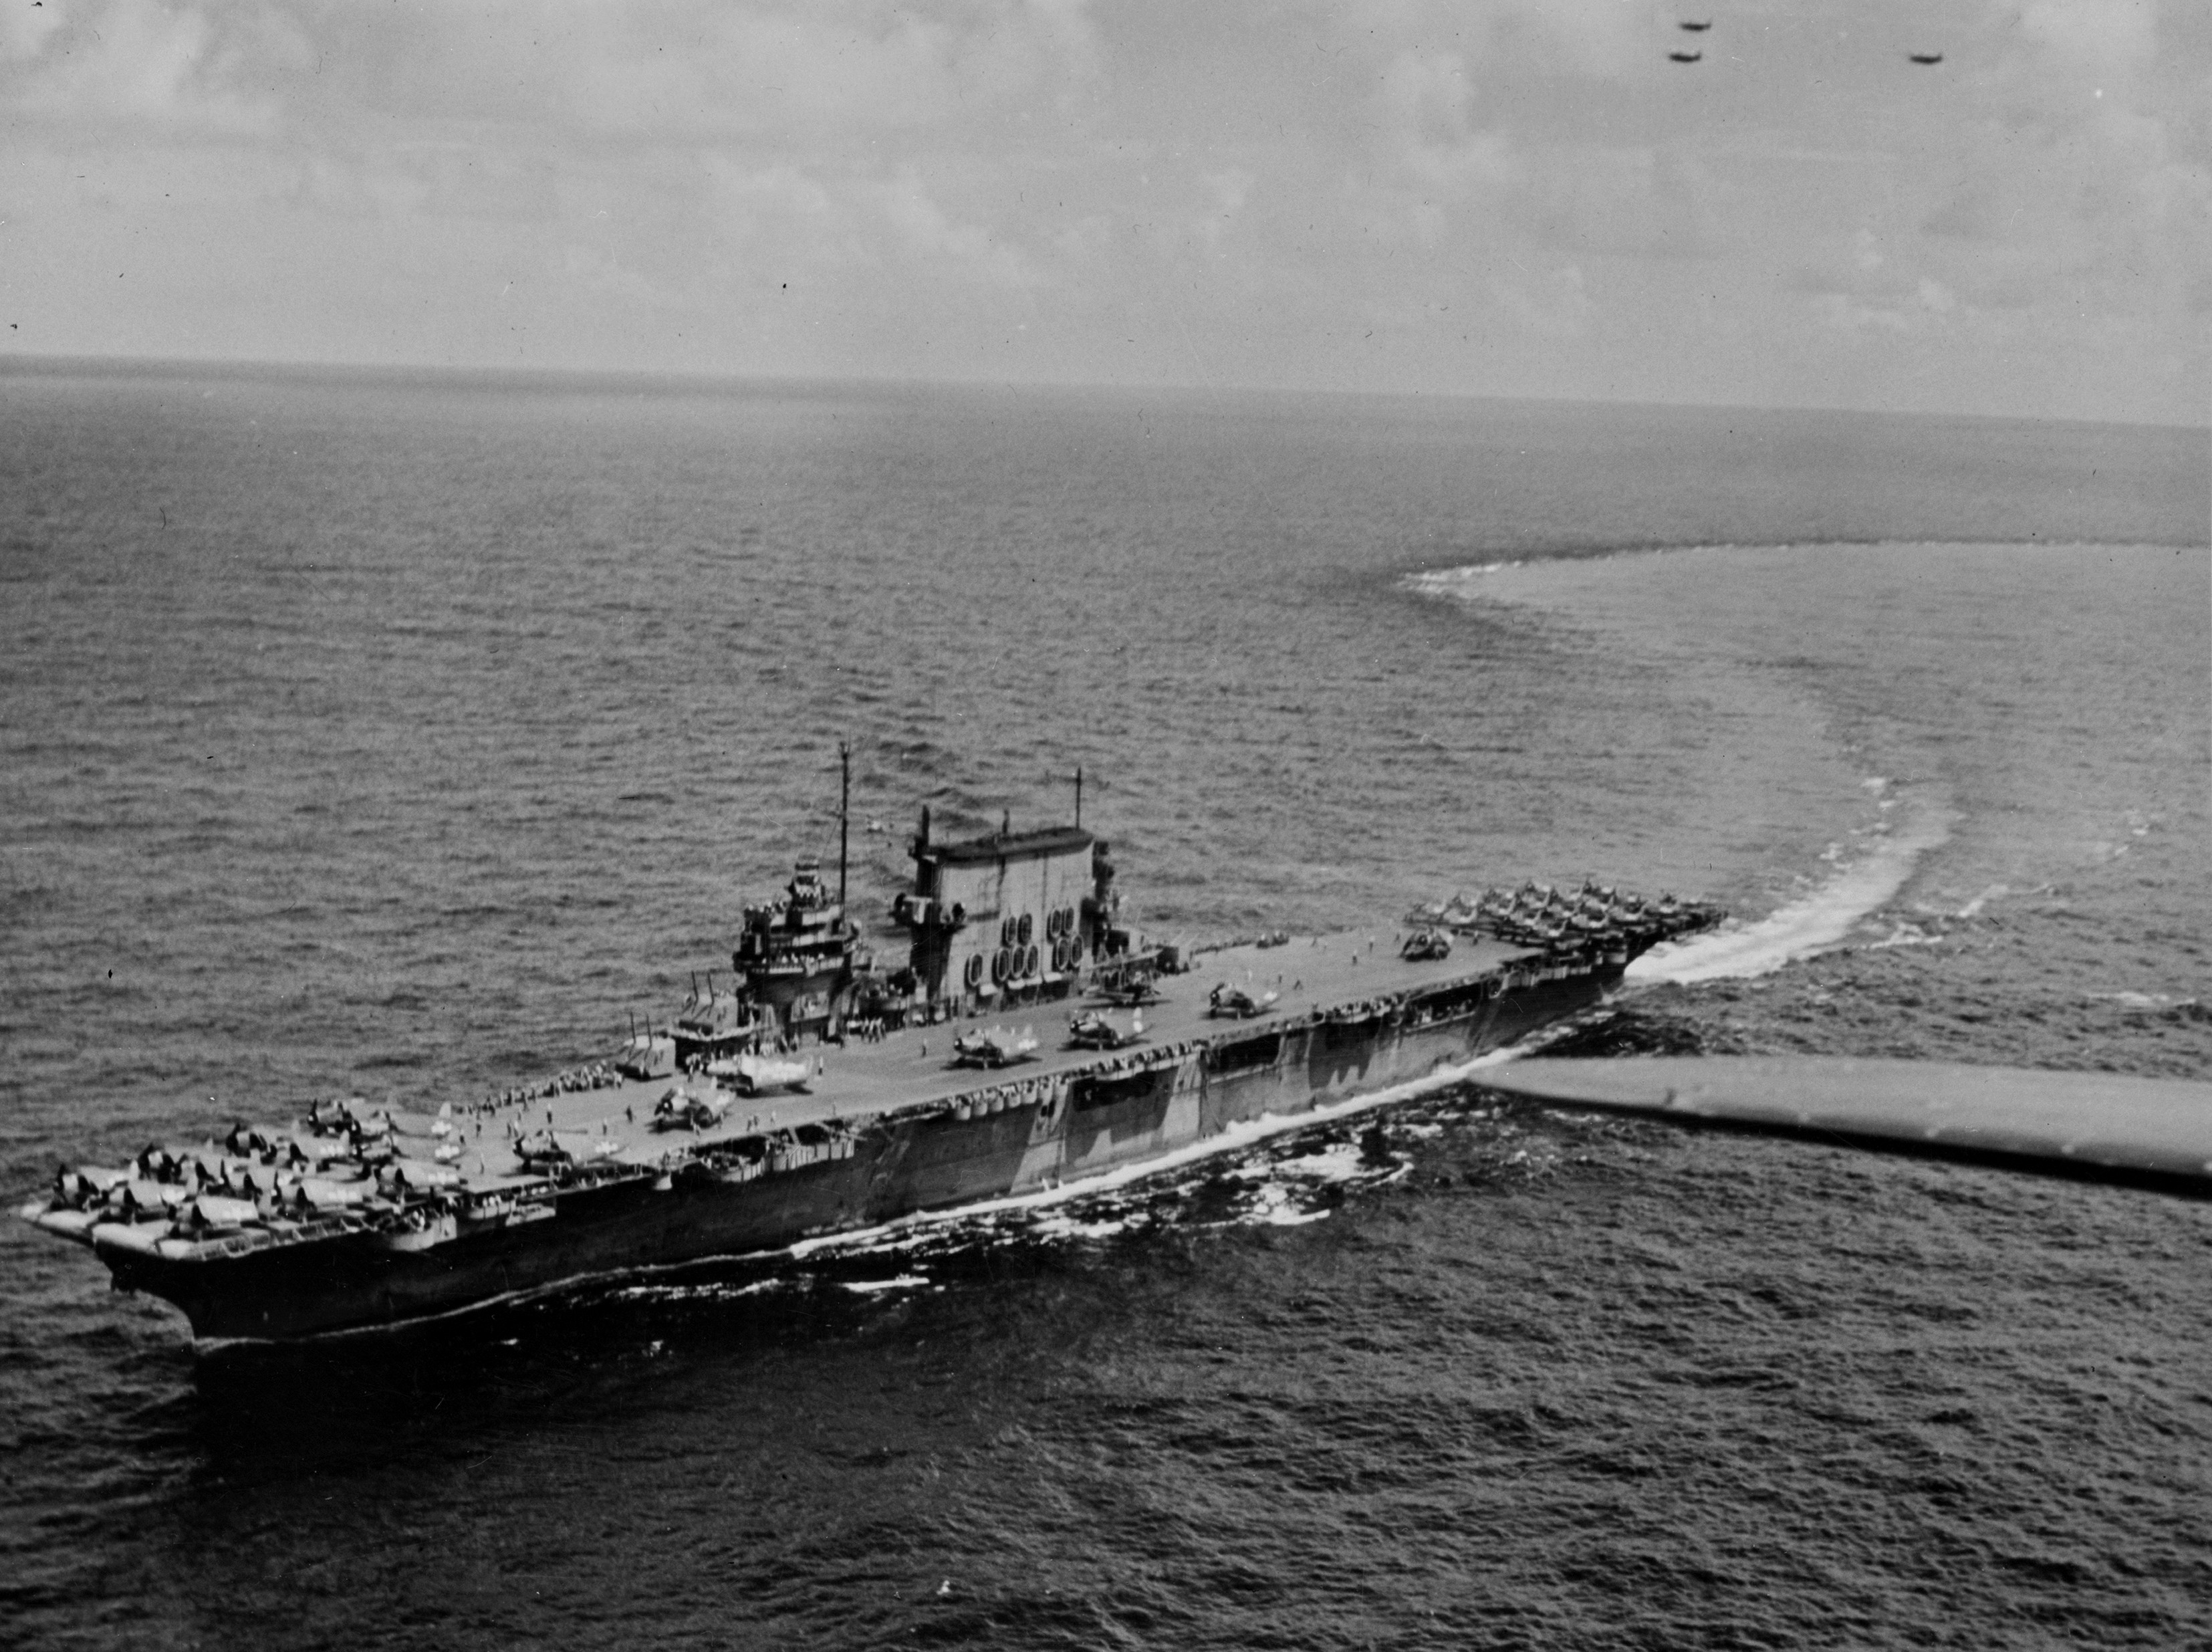 USS Saratoga underway with SBD Dauntless, F6F Hellcat, and TBF Avenger aircraft on her flight deck, 1943-1944